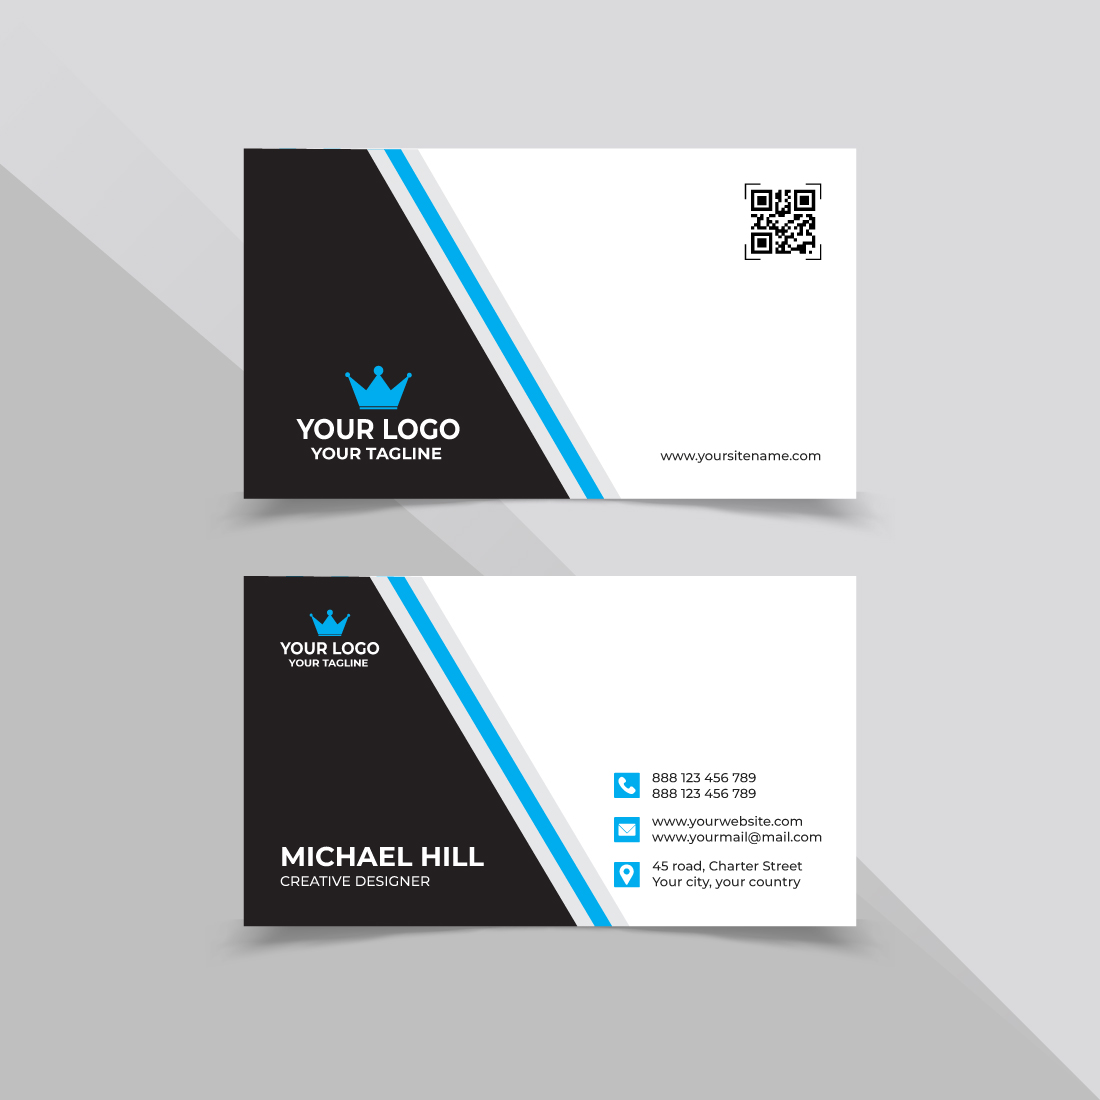 Black and white business card with a blue stripe.